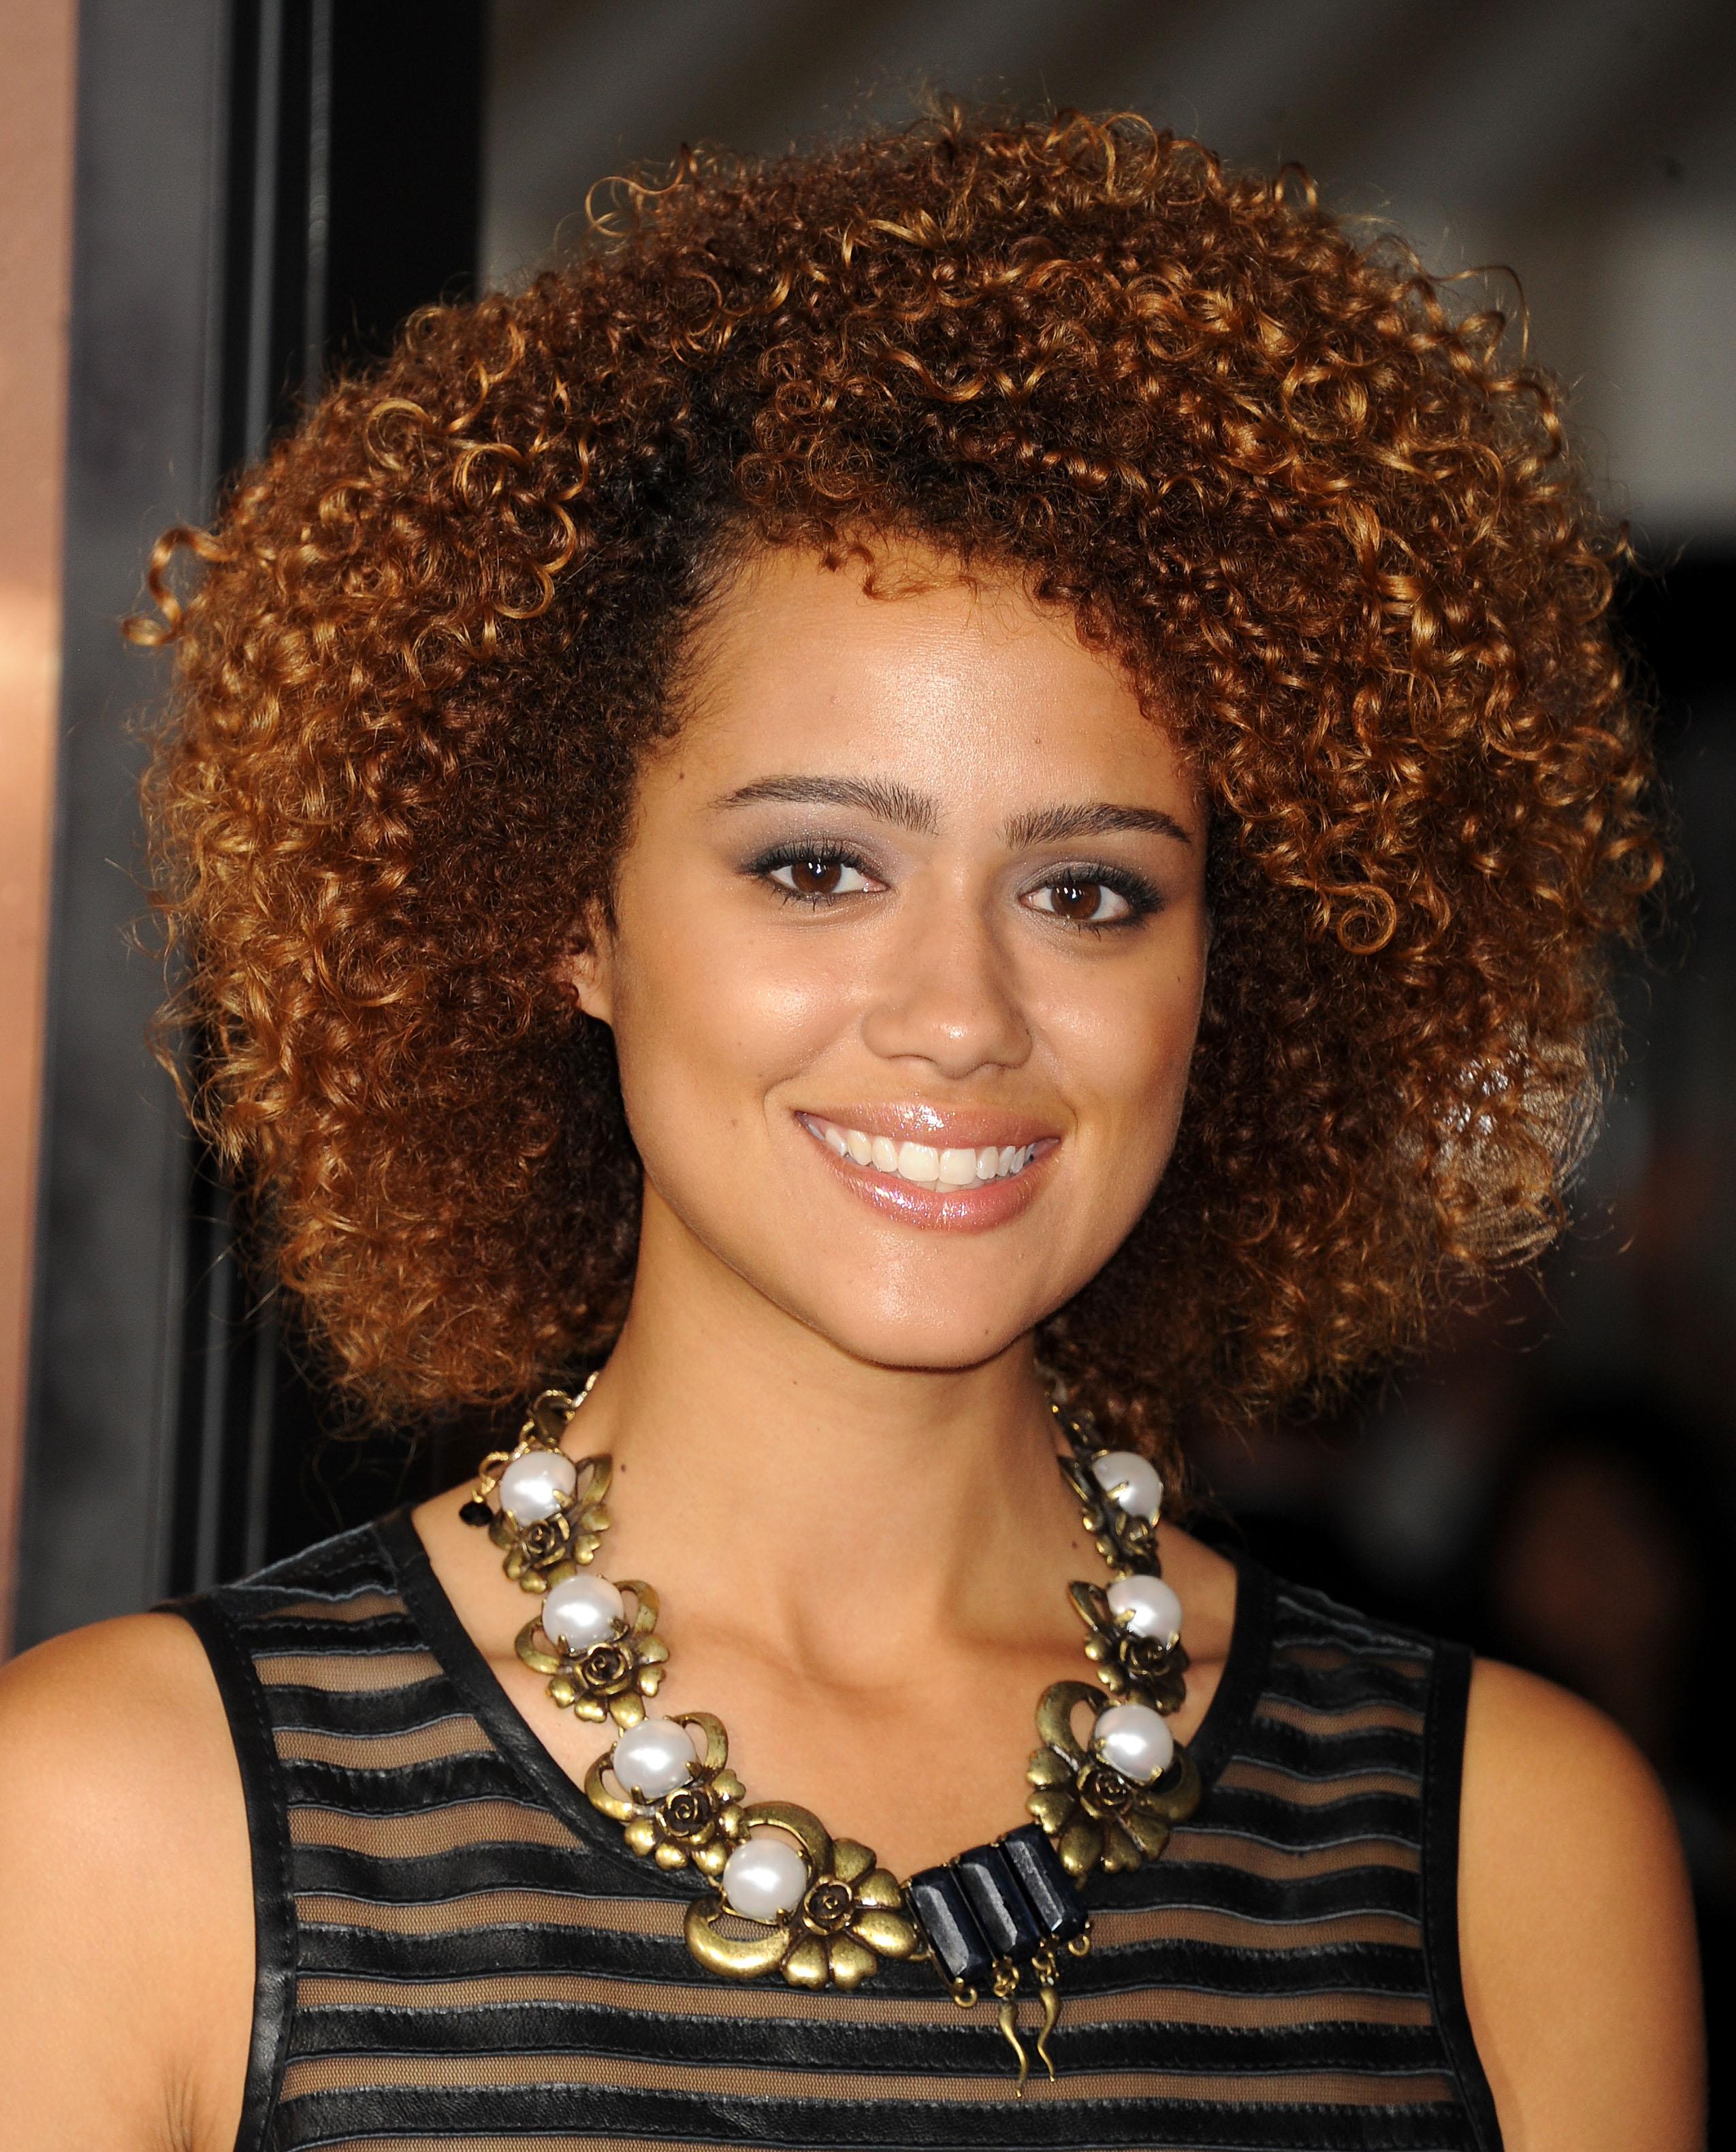 Nathalie Emmanuel pictures gallery (5) | Film Actresses